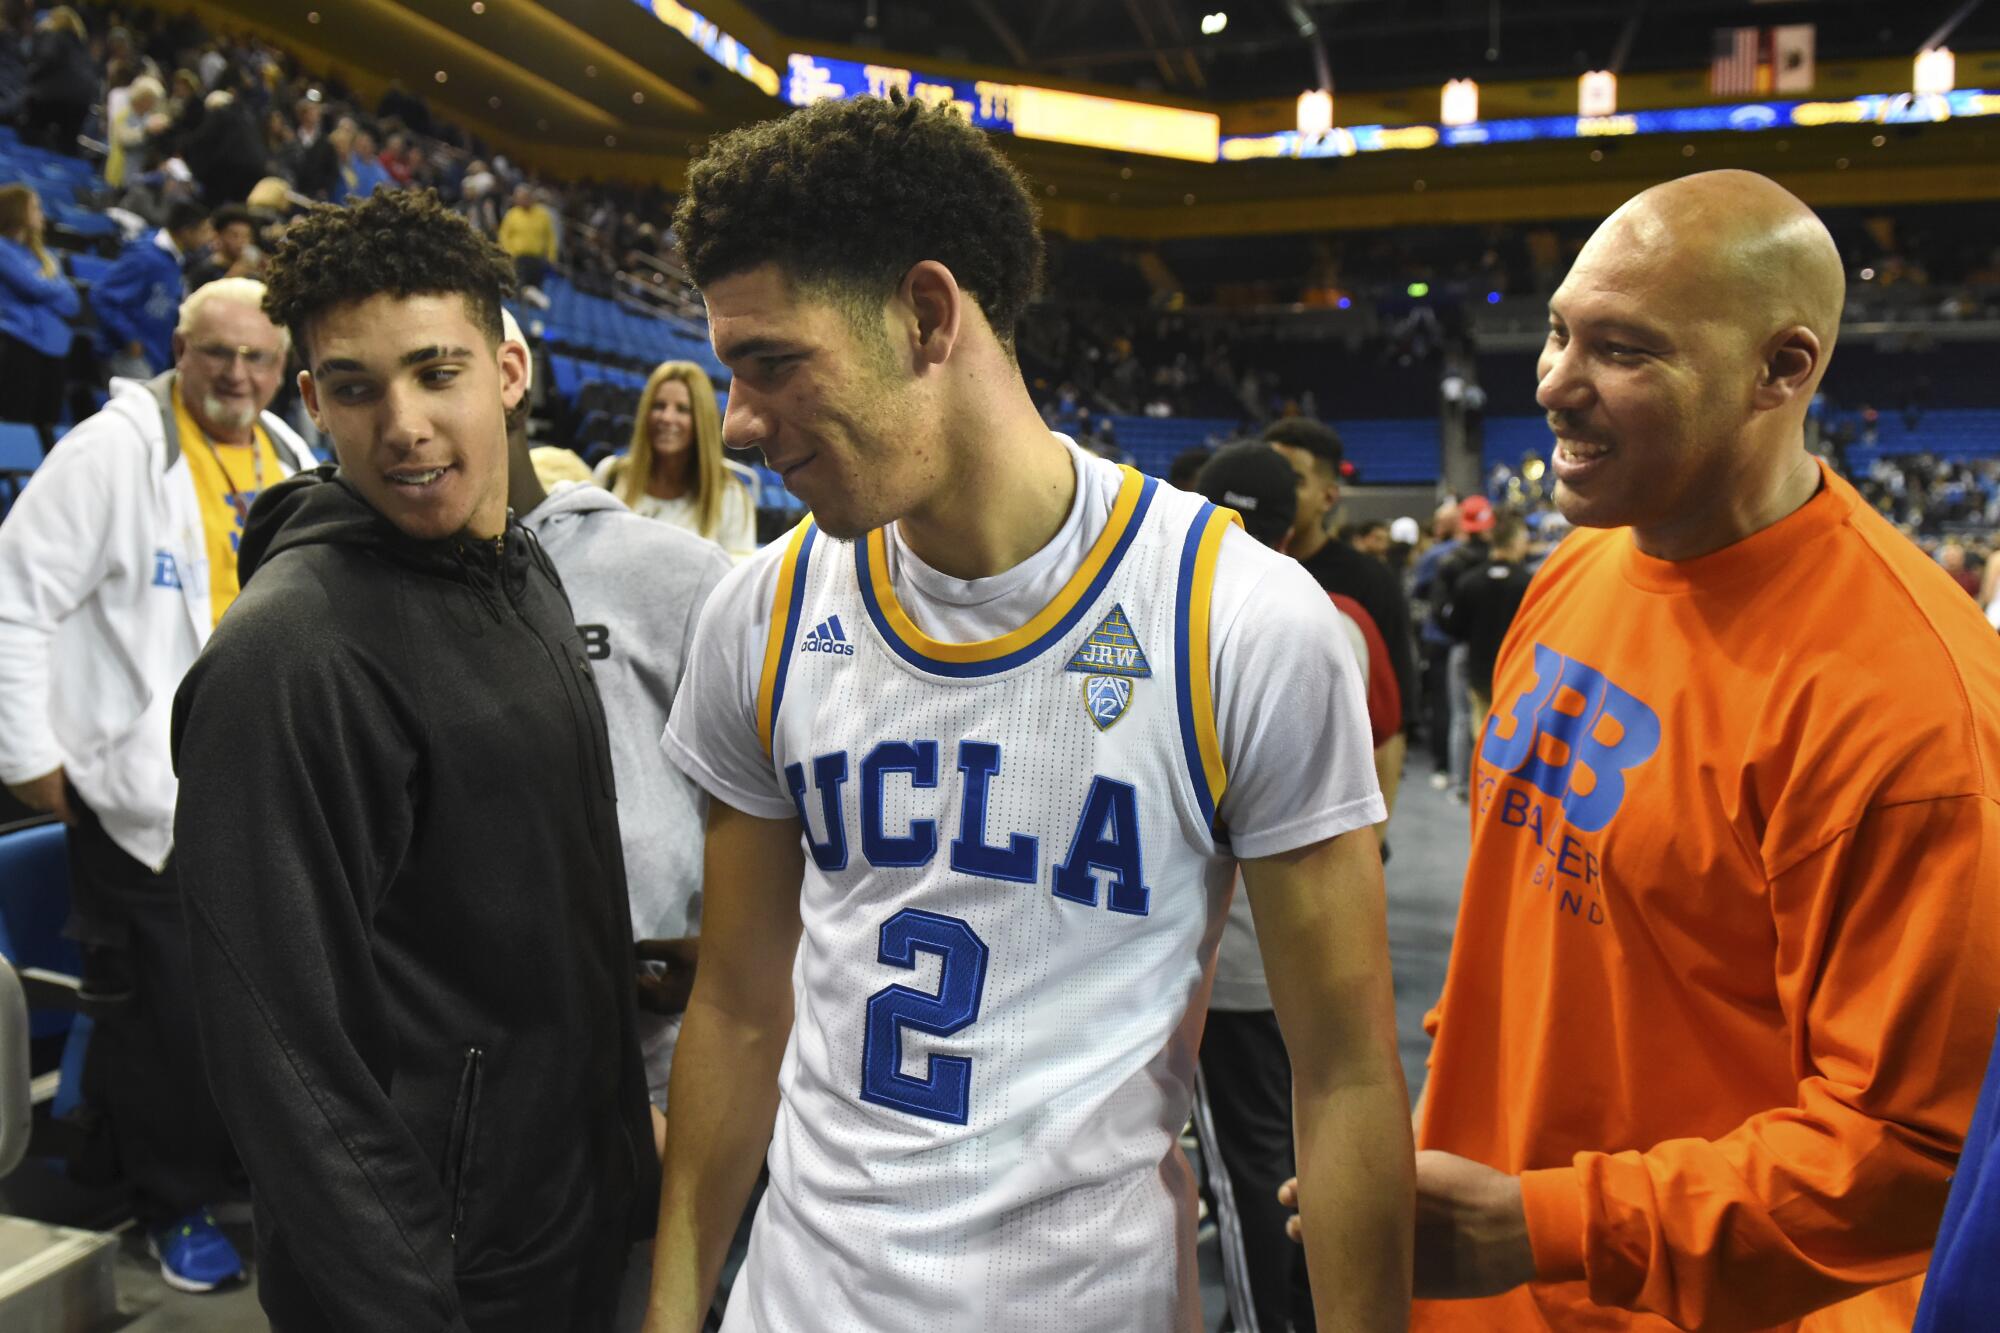 LaVar Ball watches as eldest son Lonzo greets middle brother LiAngelo after a UcLA game on Nov. 20, 2016.